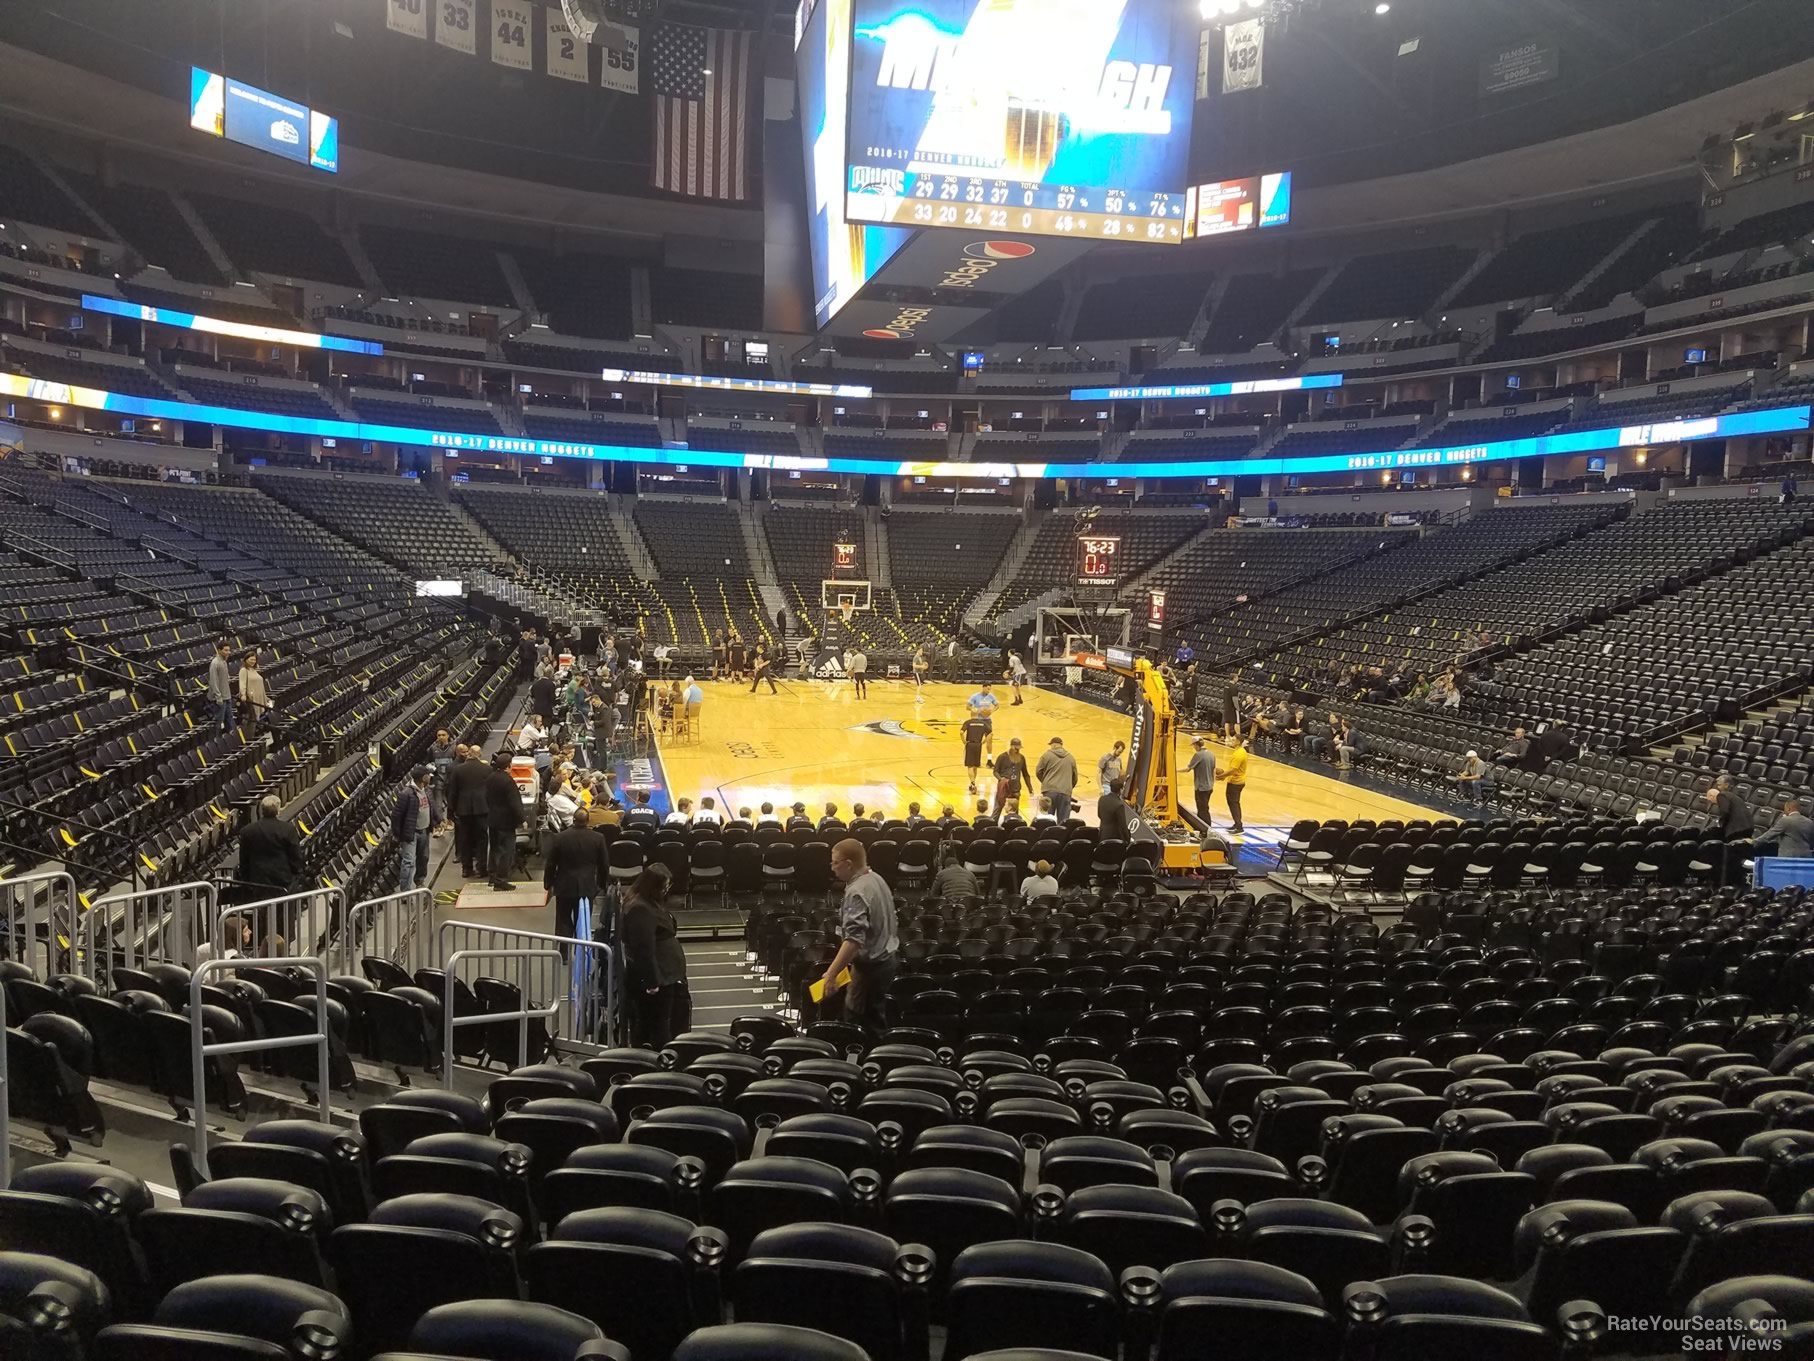 section 140, row 11 seat view  for basketball - ball arena